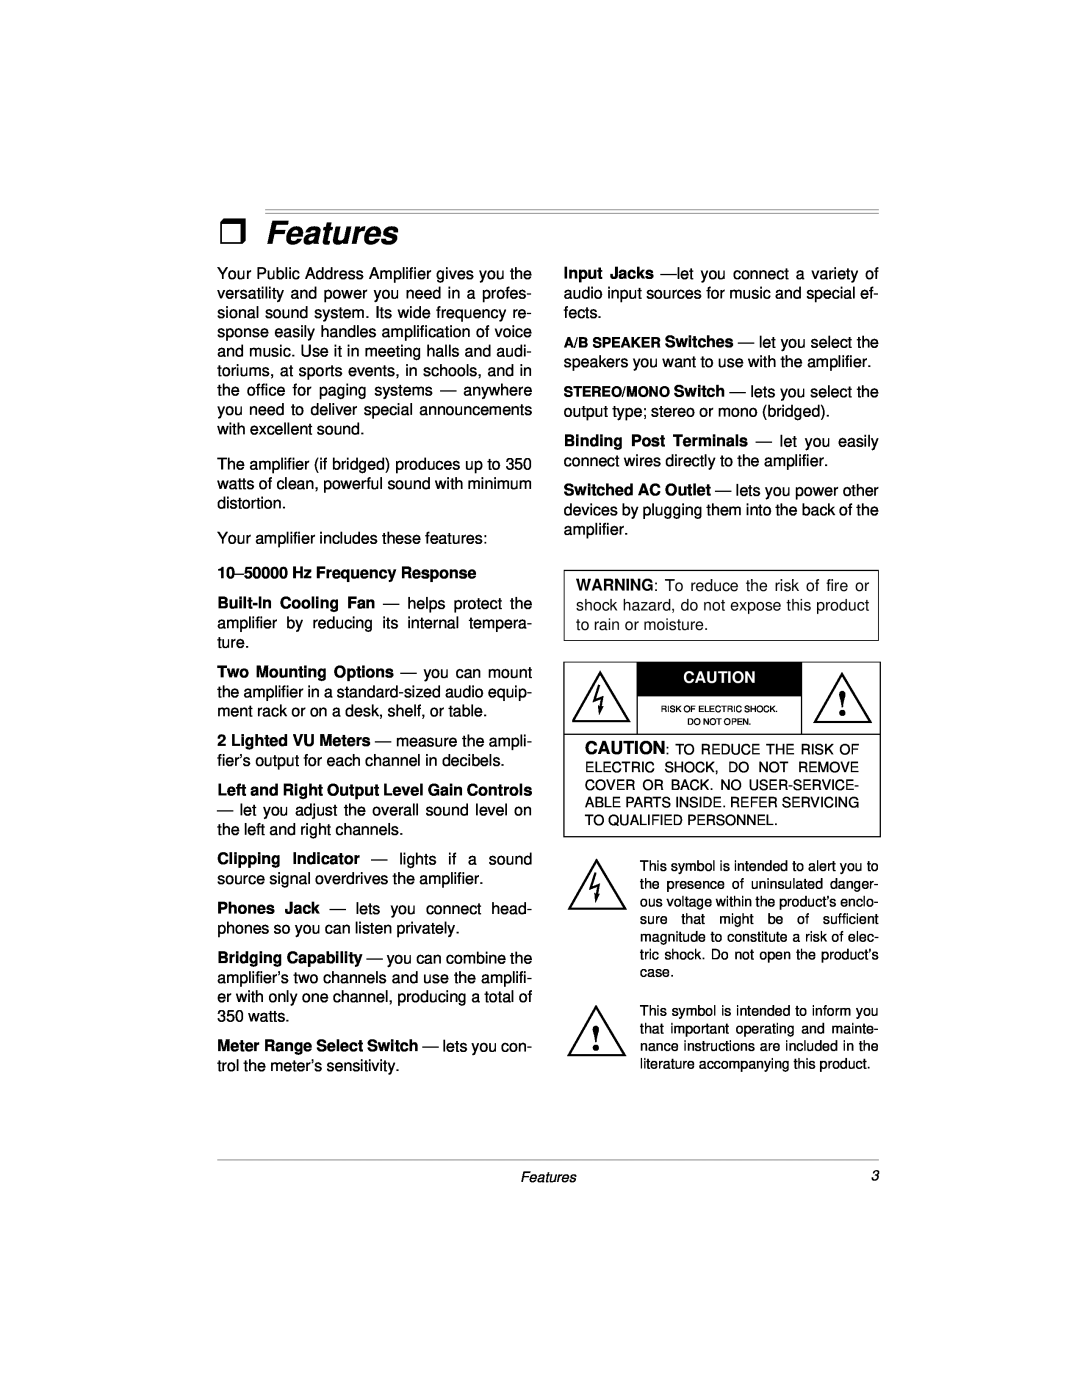 Radio Shack 32-2004, 04A00 owner manual ˆFeatures, 10-50000Hz Frequency Response, Left and Right Output Level Gain Controls 